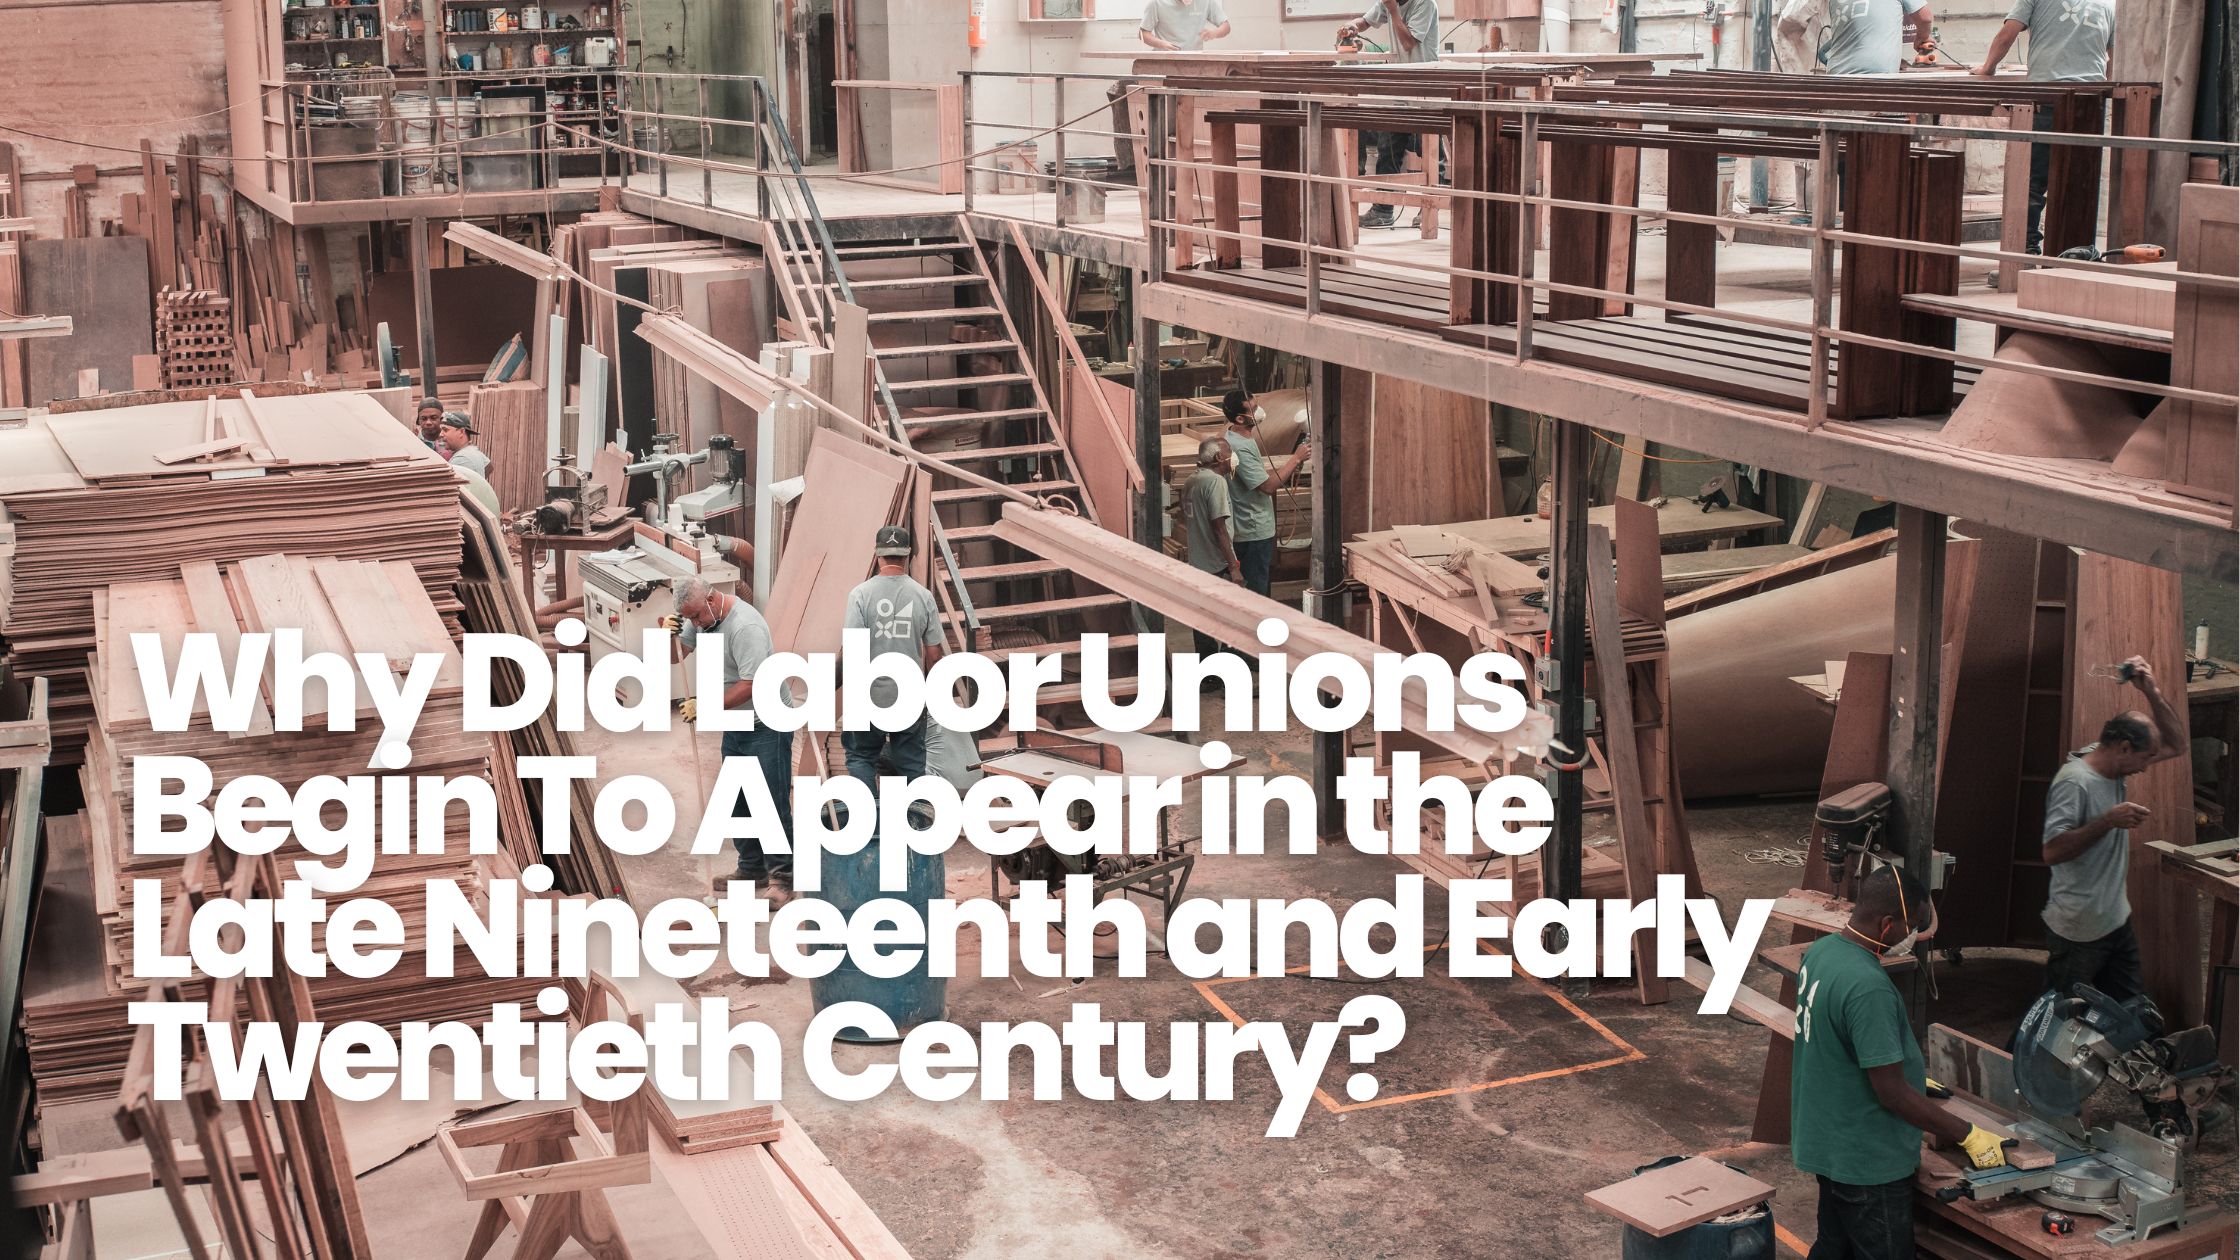 Why Did Labor Unions Begin To Appear in the Late Nineteenth and Early Twentieth Century